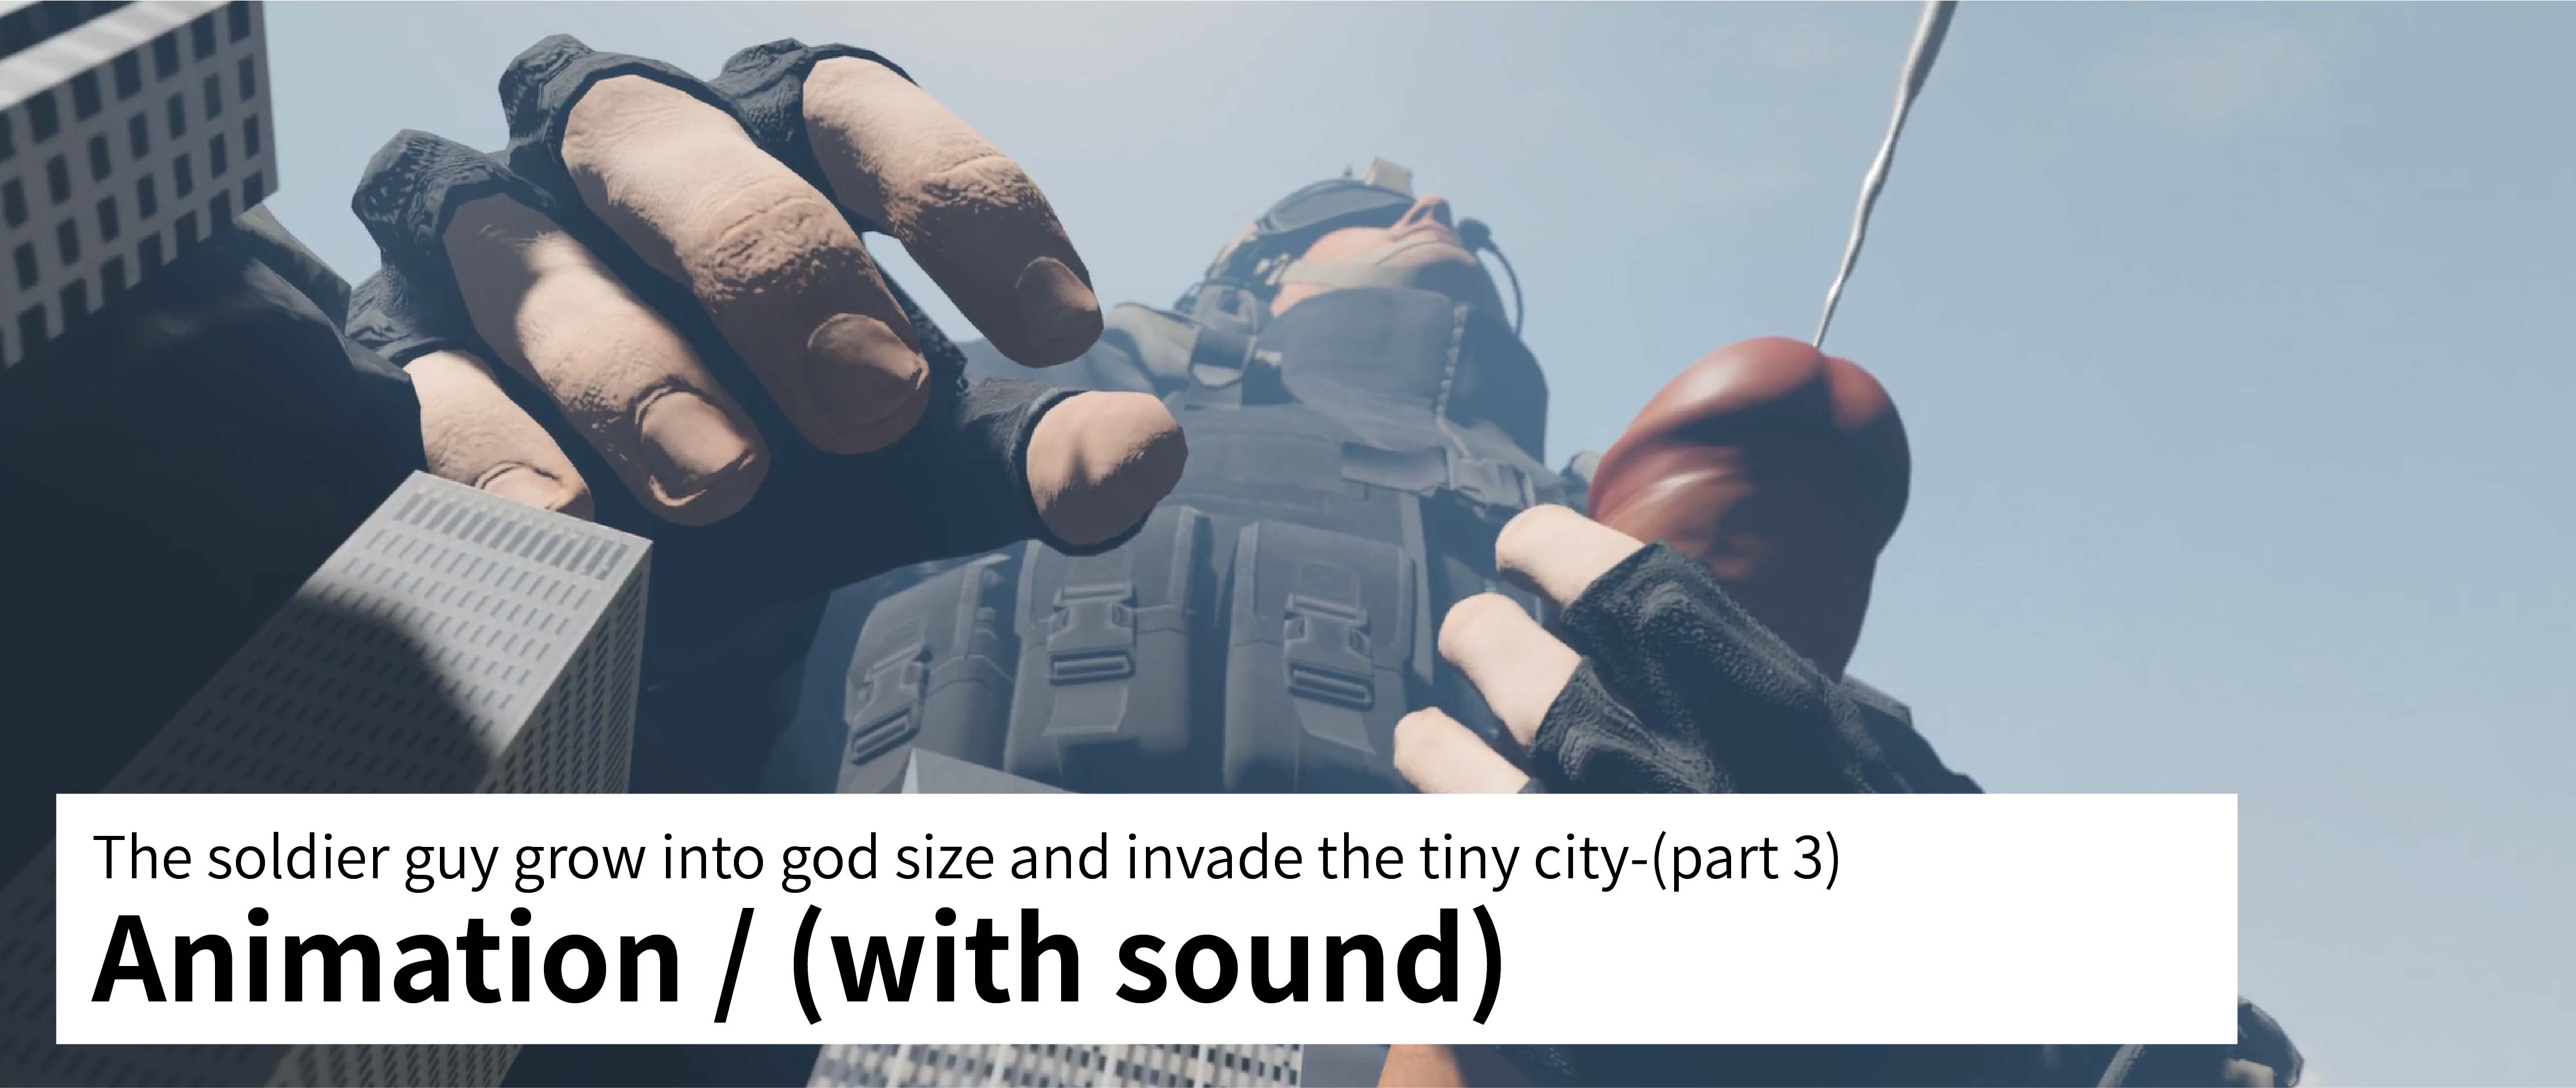 The soldier guy grow into god size and invade the tiny